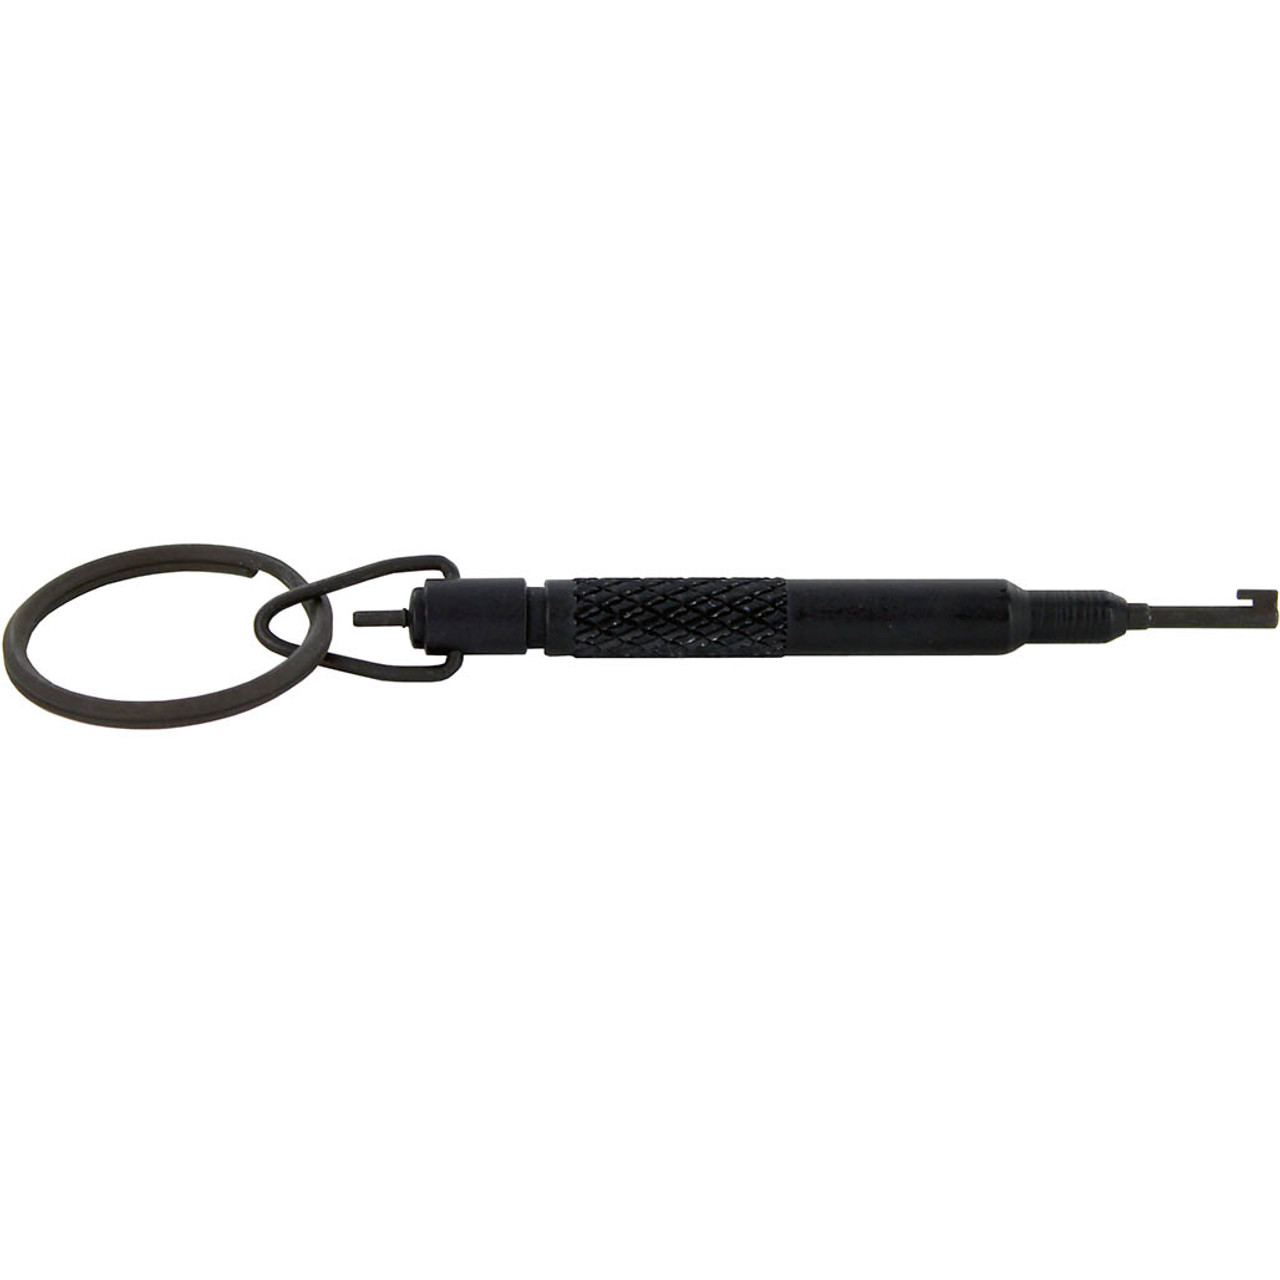 Zak Tool Solid Stainless Handcuff Key